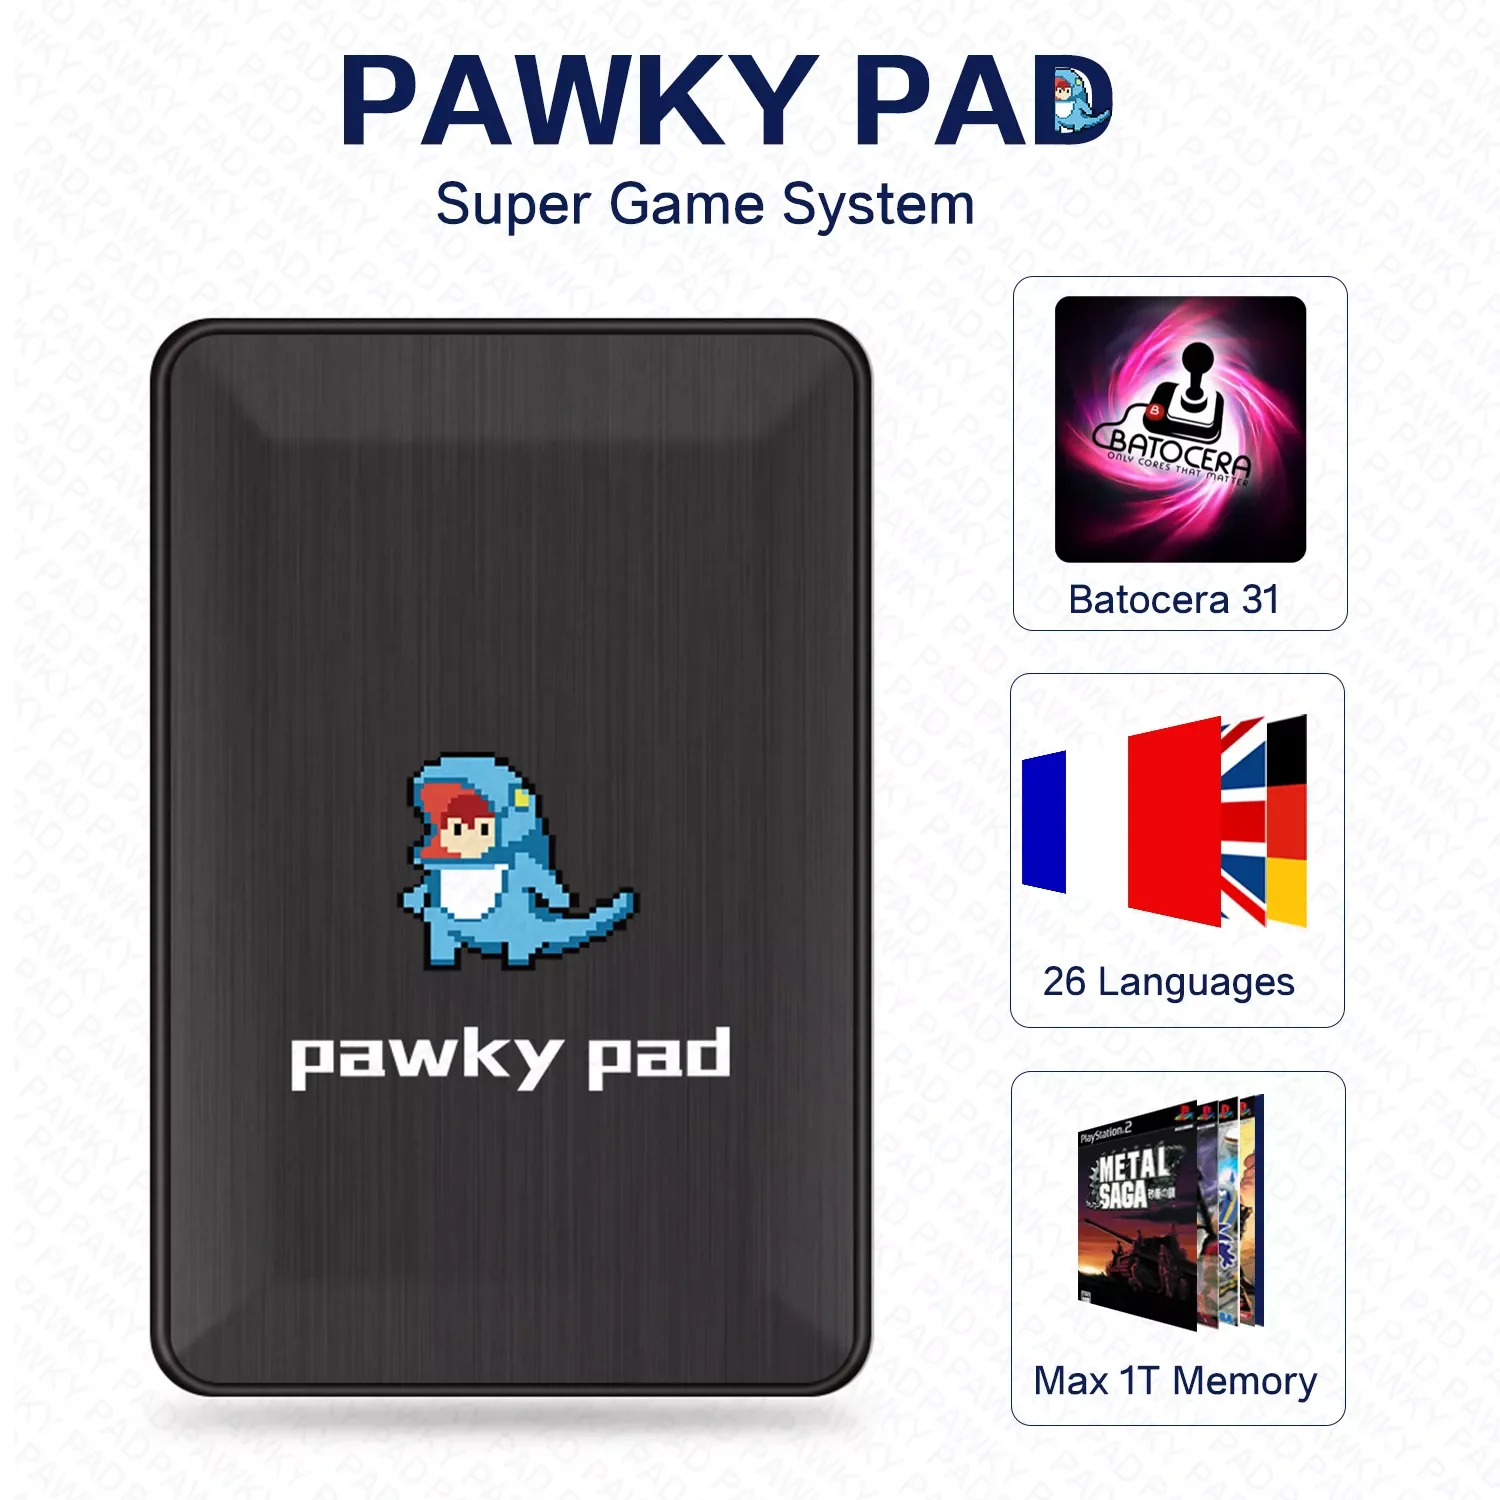 2T HDD Pawky Pad Retro Video Game 4K 3D Portable External Game Console for G Cube/Saturn/PS2/N64 60000+ Games for Windows PC